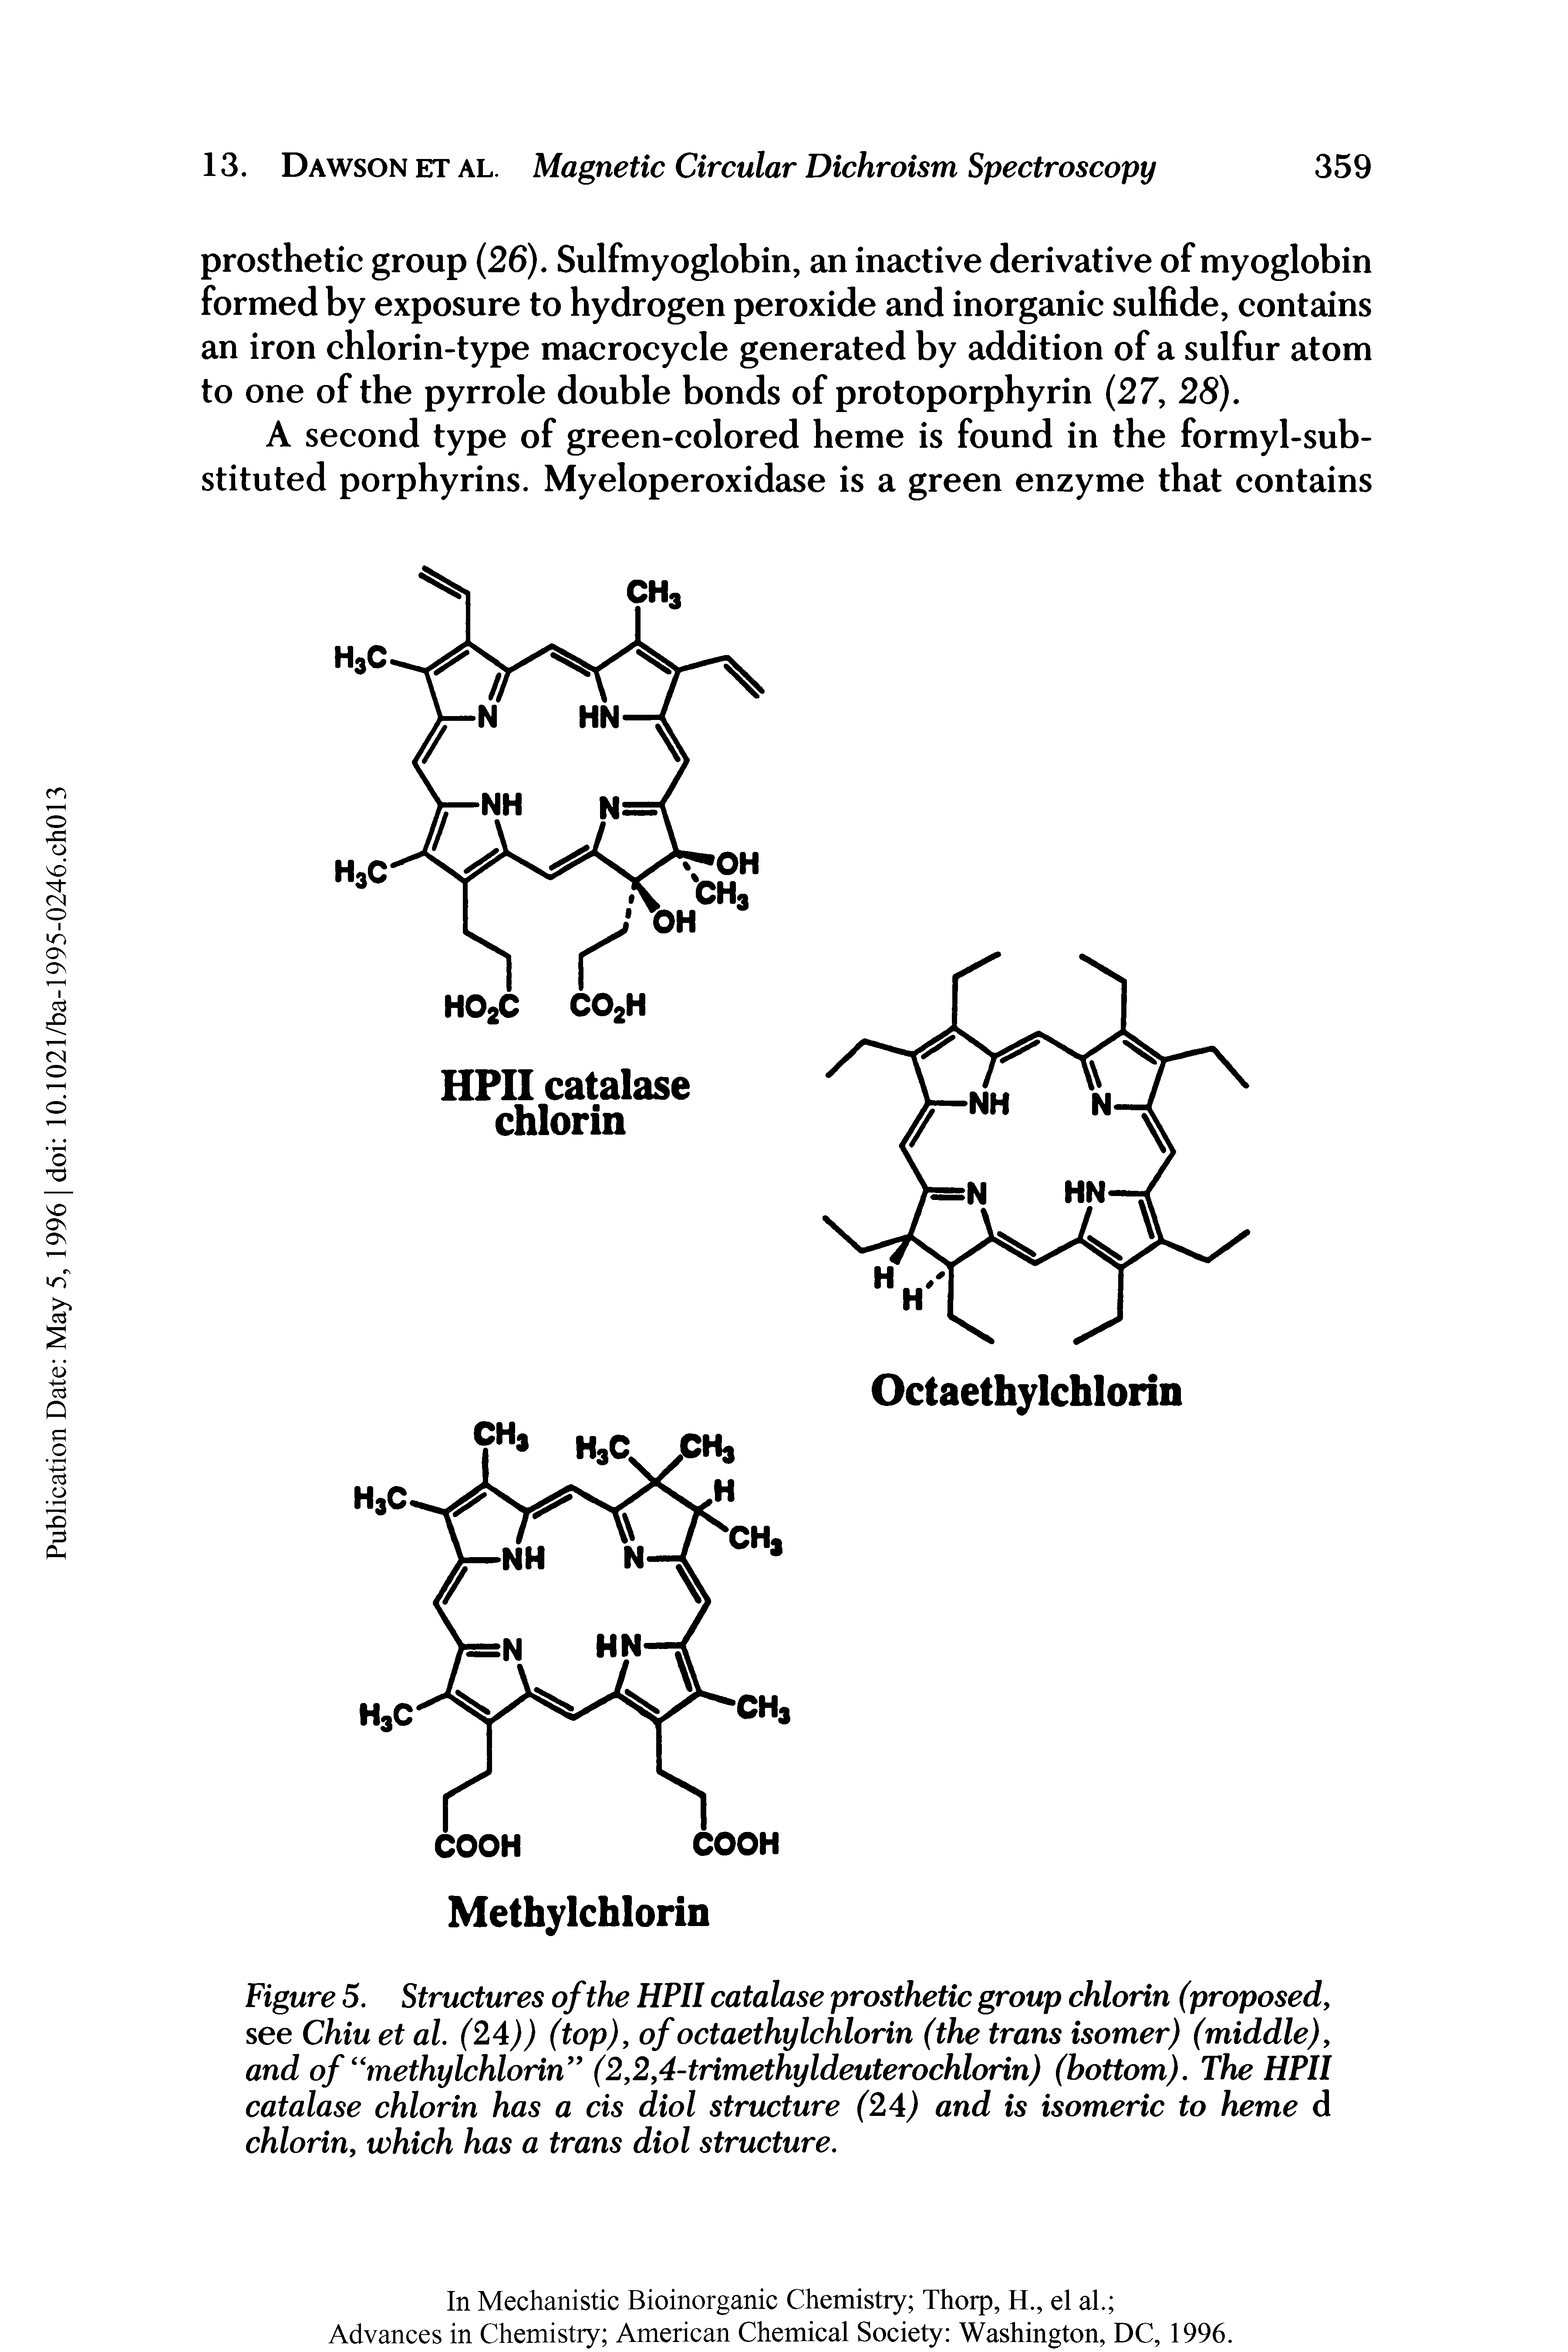 Figure 5. Structures of the HPII catalase prosthetic group chlorin (proposed, see Chiu et al (24)) (top), of octaethylchlorin (the trans isomer) (middle), and of methylchlorin (2,2,4-trimethyldeuterochlorin) (bottom). The HPII catalase chlorin has a cis diol structure (24) and is isomeric to heme d chlorin, which has a trans diol structure.